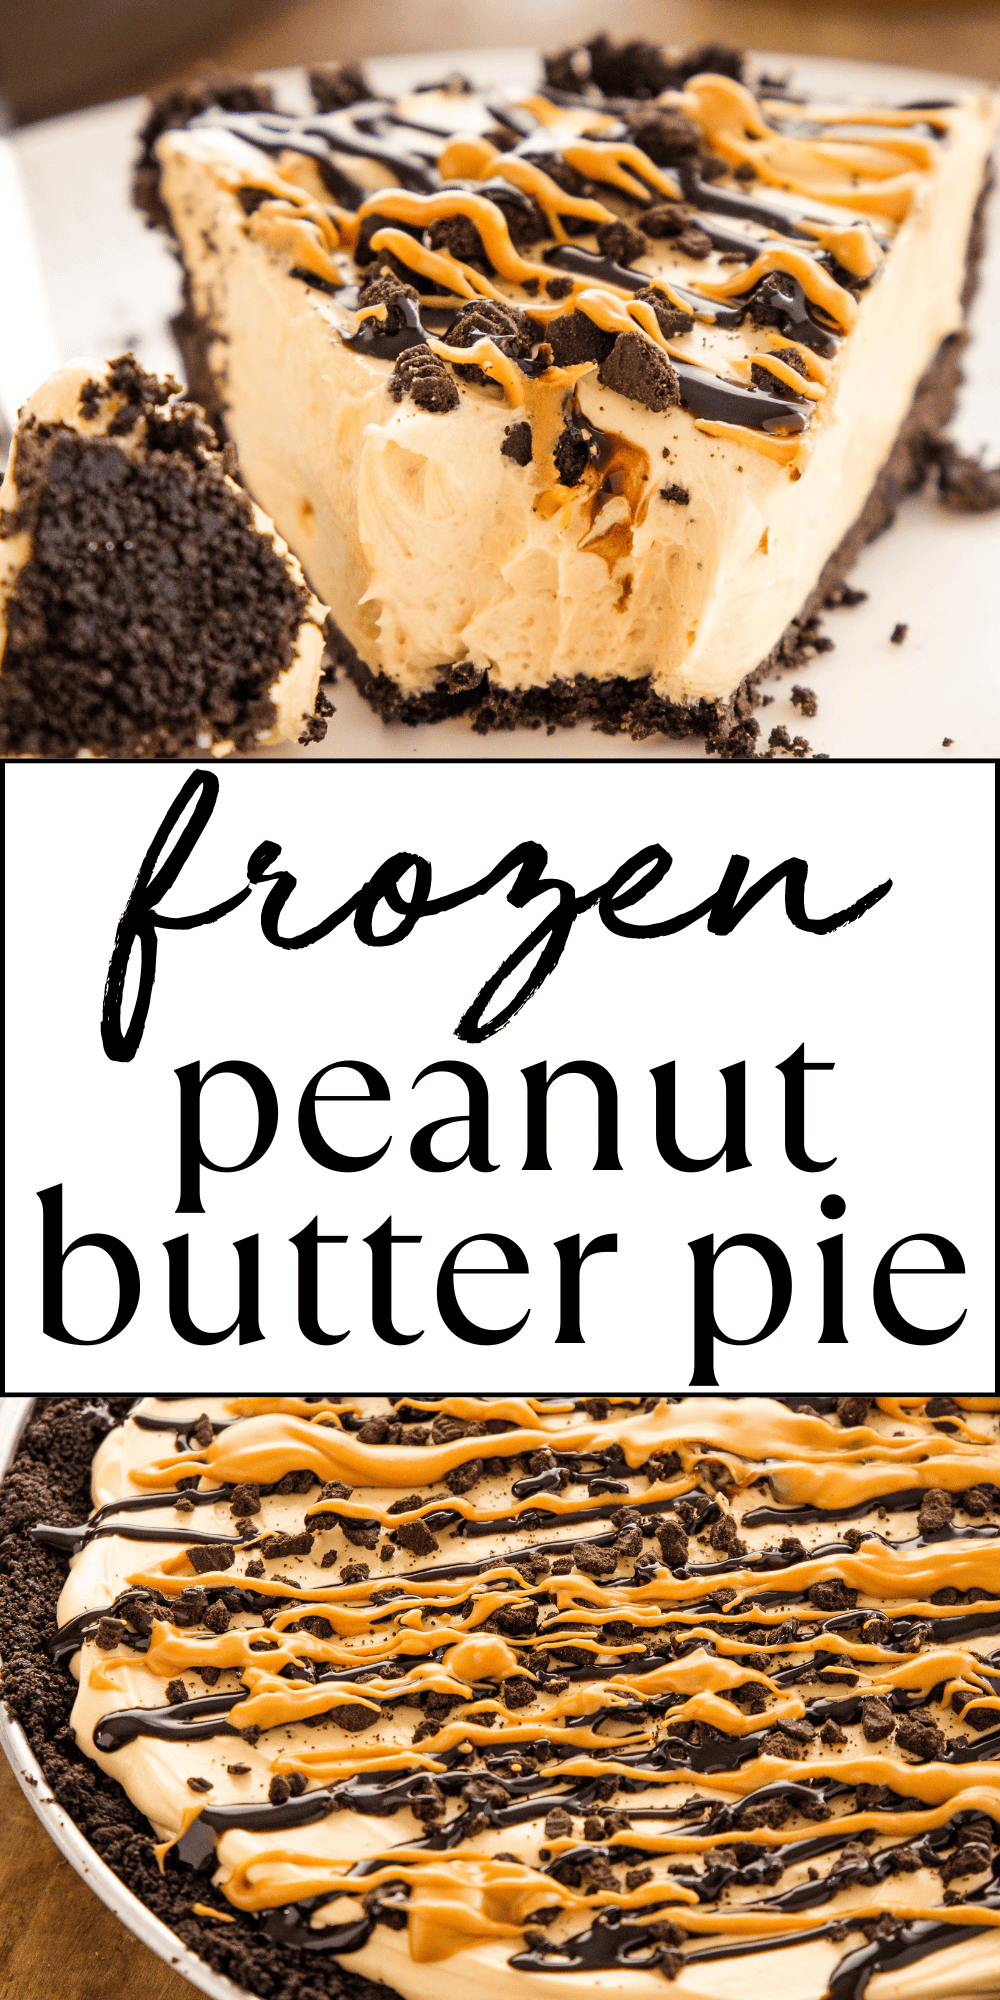 This Chocolate Peanut Butter Pie is the best ultra-creamy summer dessert for chocolate and peanut butter lovers! Make it in minutes with only a few simple ingredients!! Recipe from thebusybaker.ca! #chocolatepeanutbutterdessert #summerdessert #easysummerdessert #frozenpie via @busybakerblog